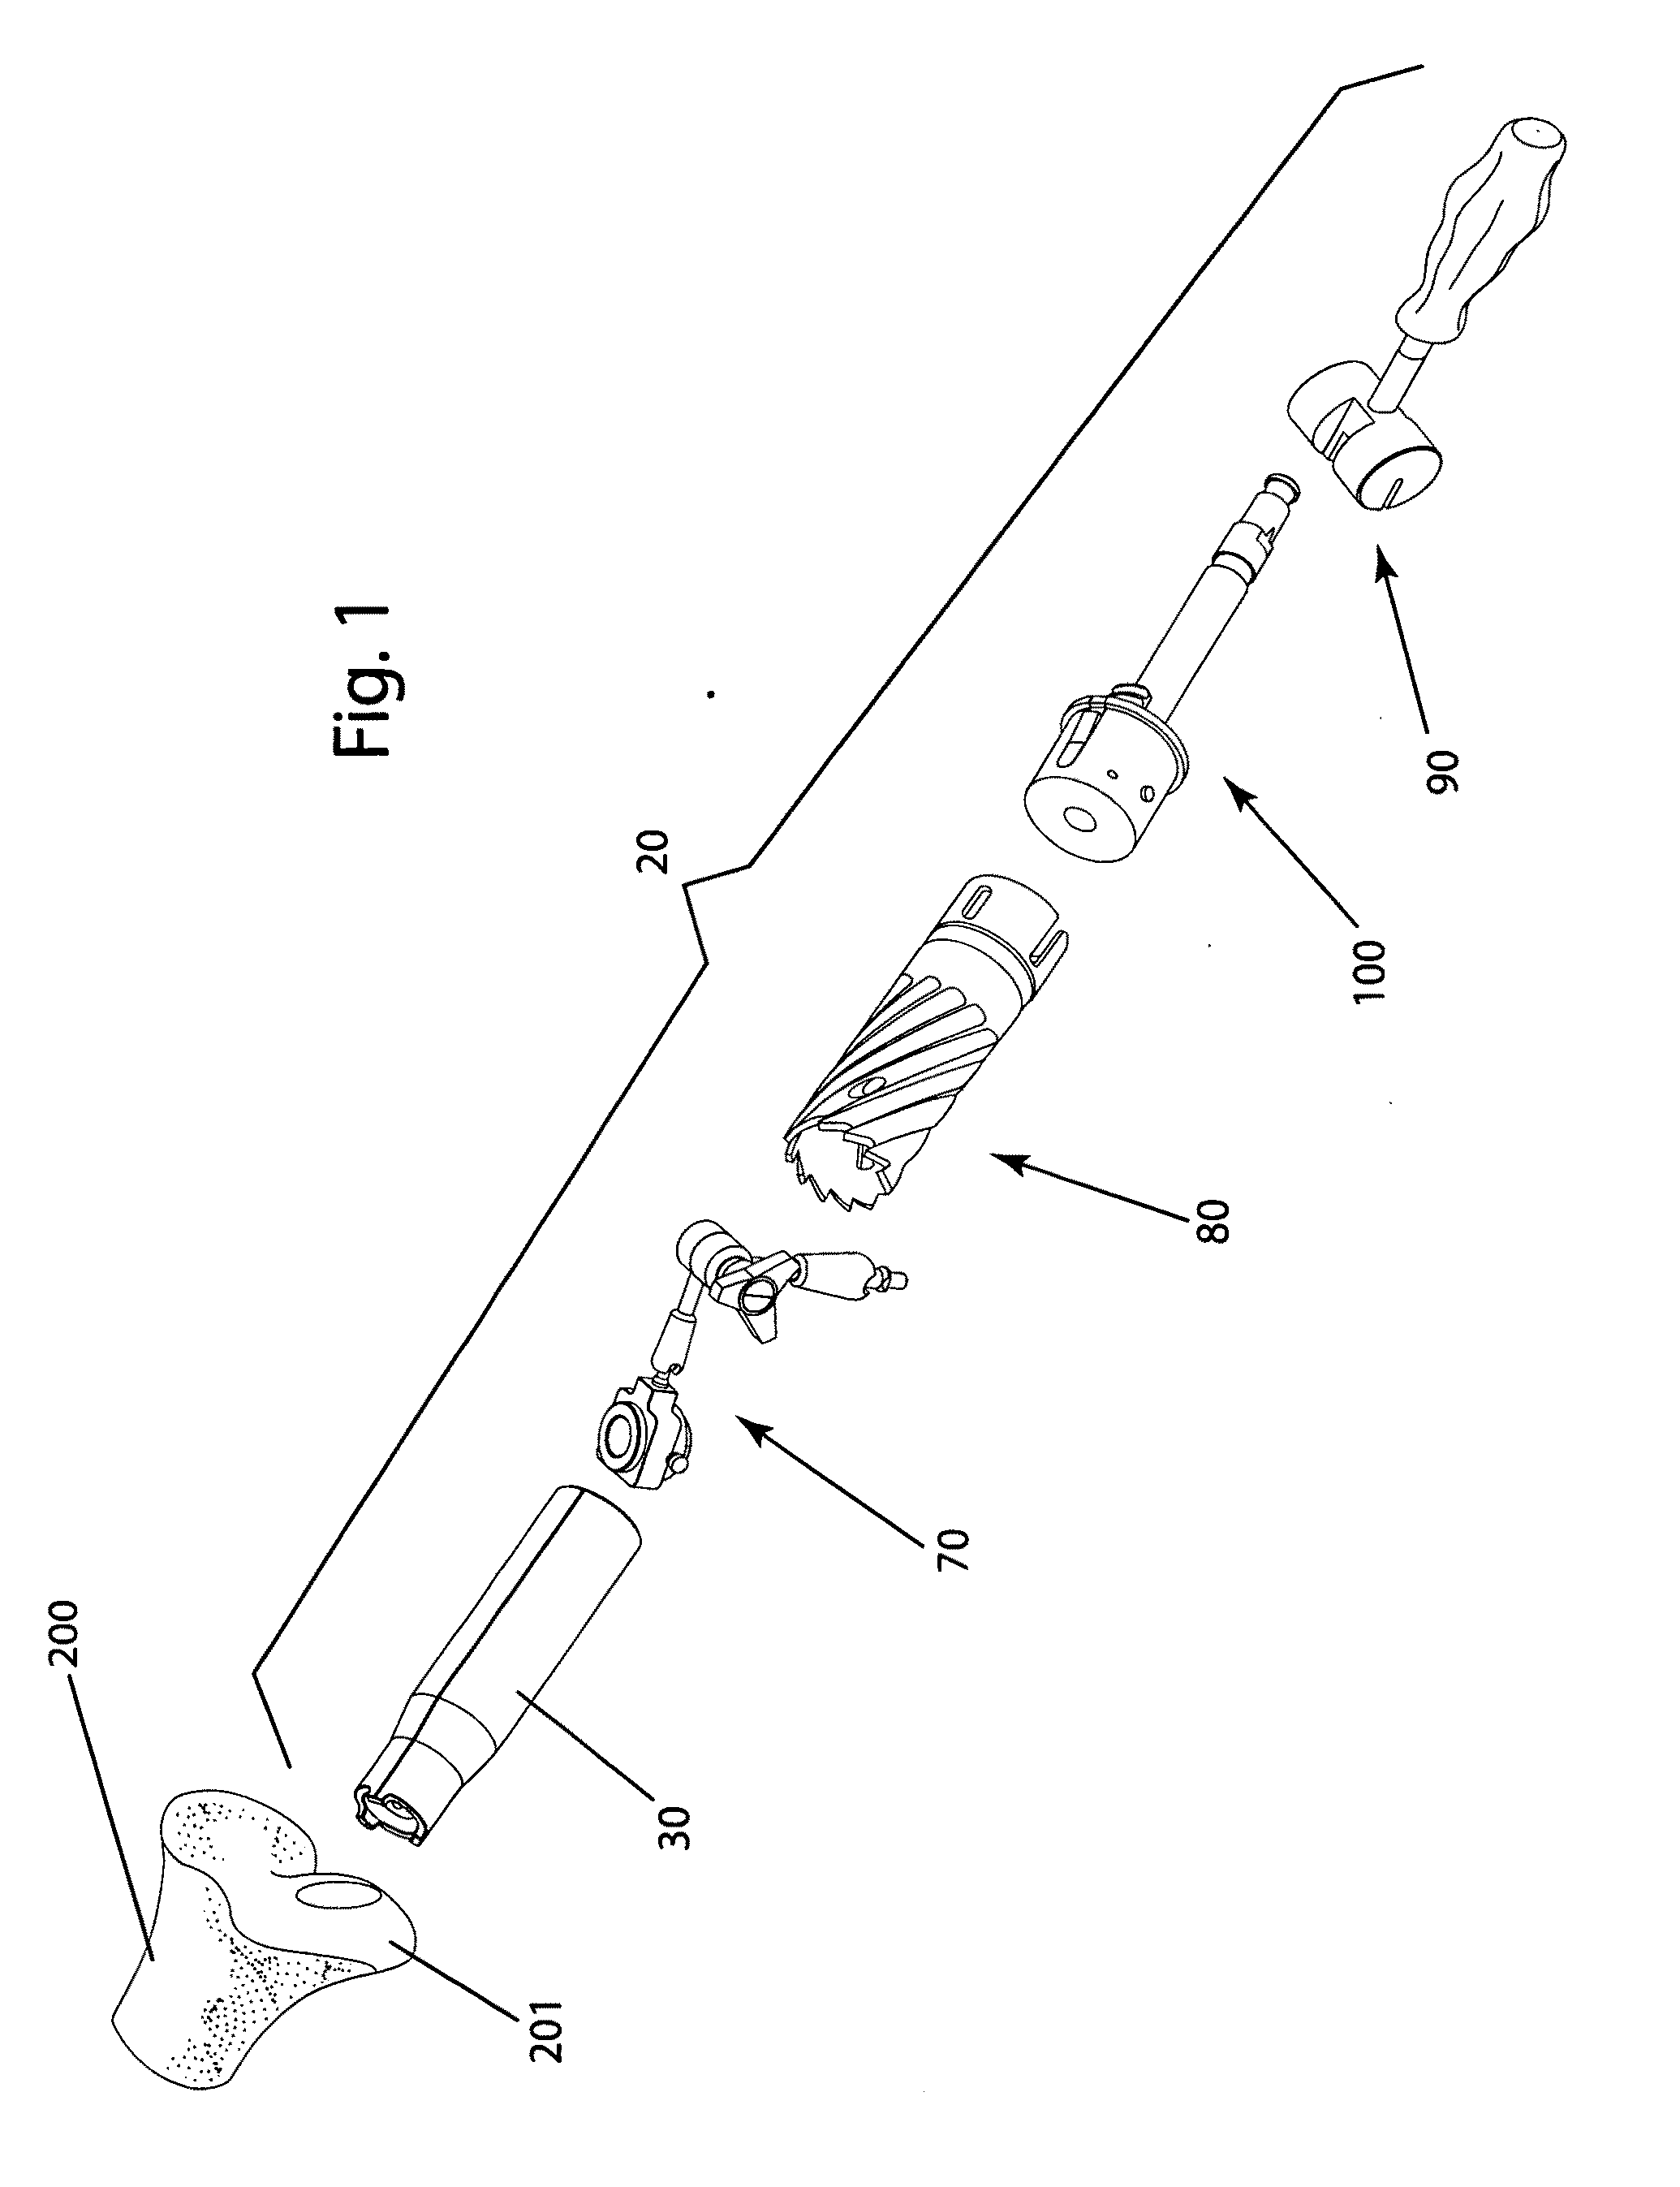 Surgical allograft bone plug cutting tool assembly and method of using same